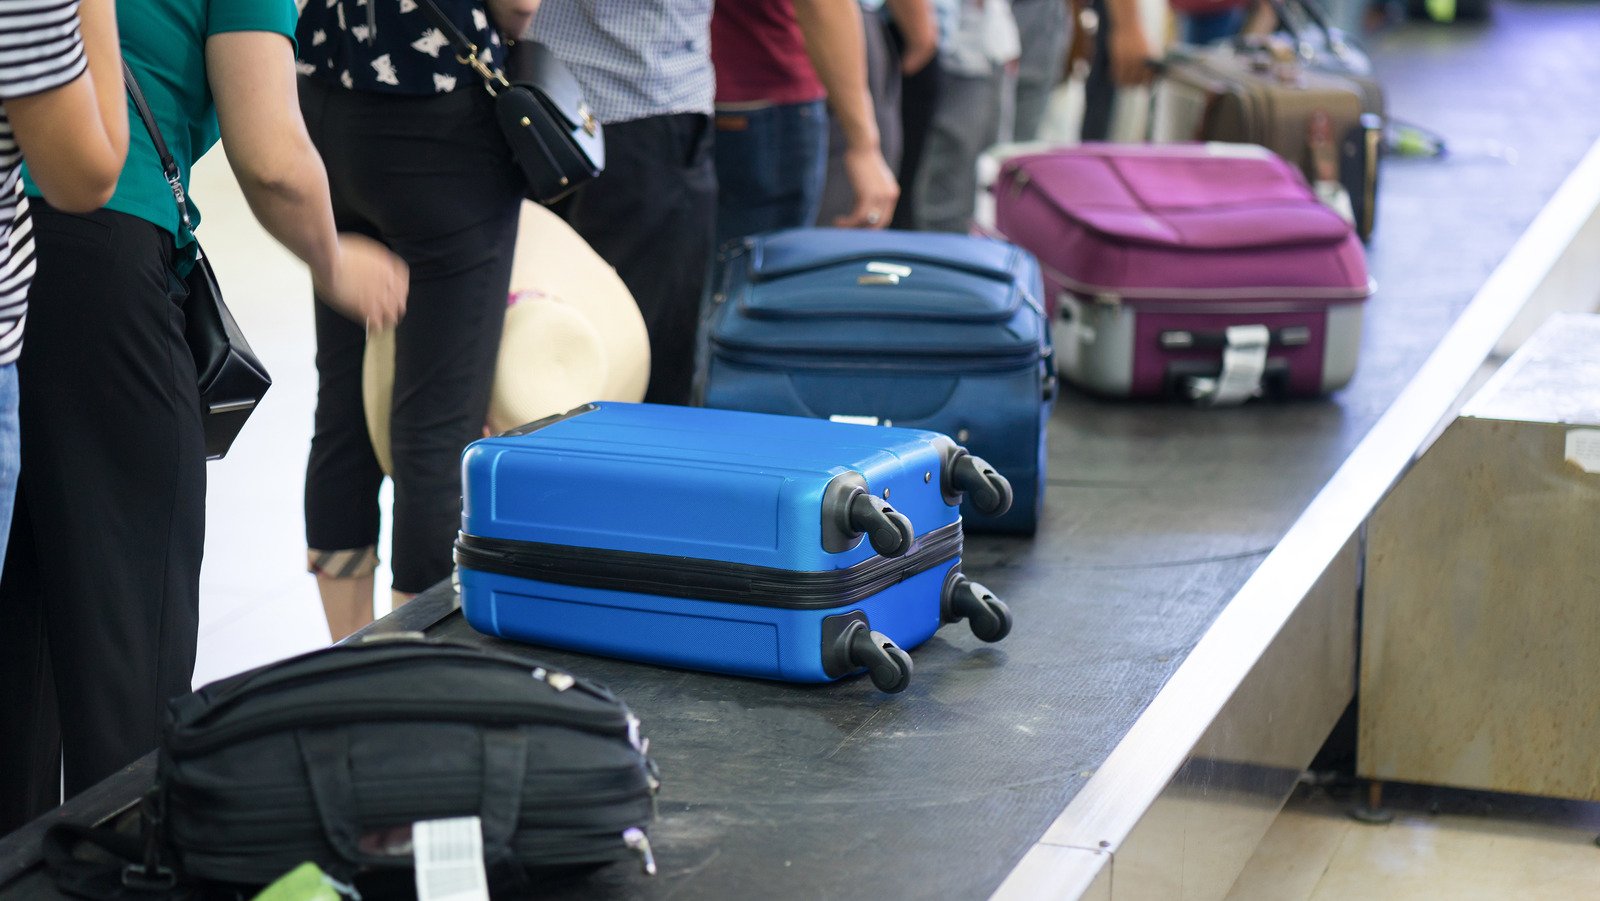 Reduce The Stress Of Losing Your Checked Bags When Flying With This Popular Airline